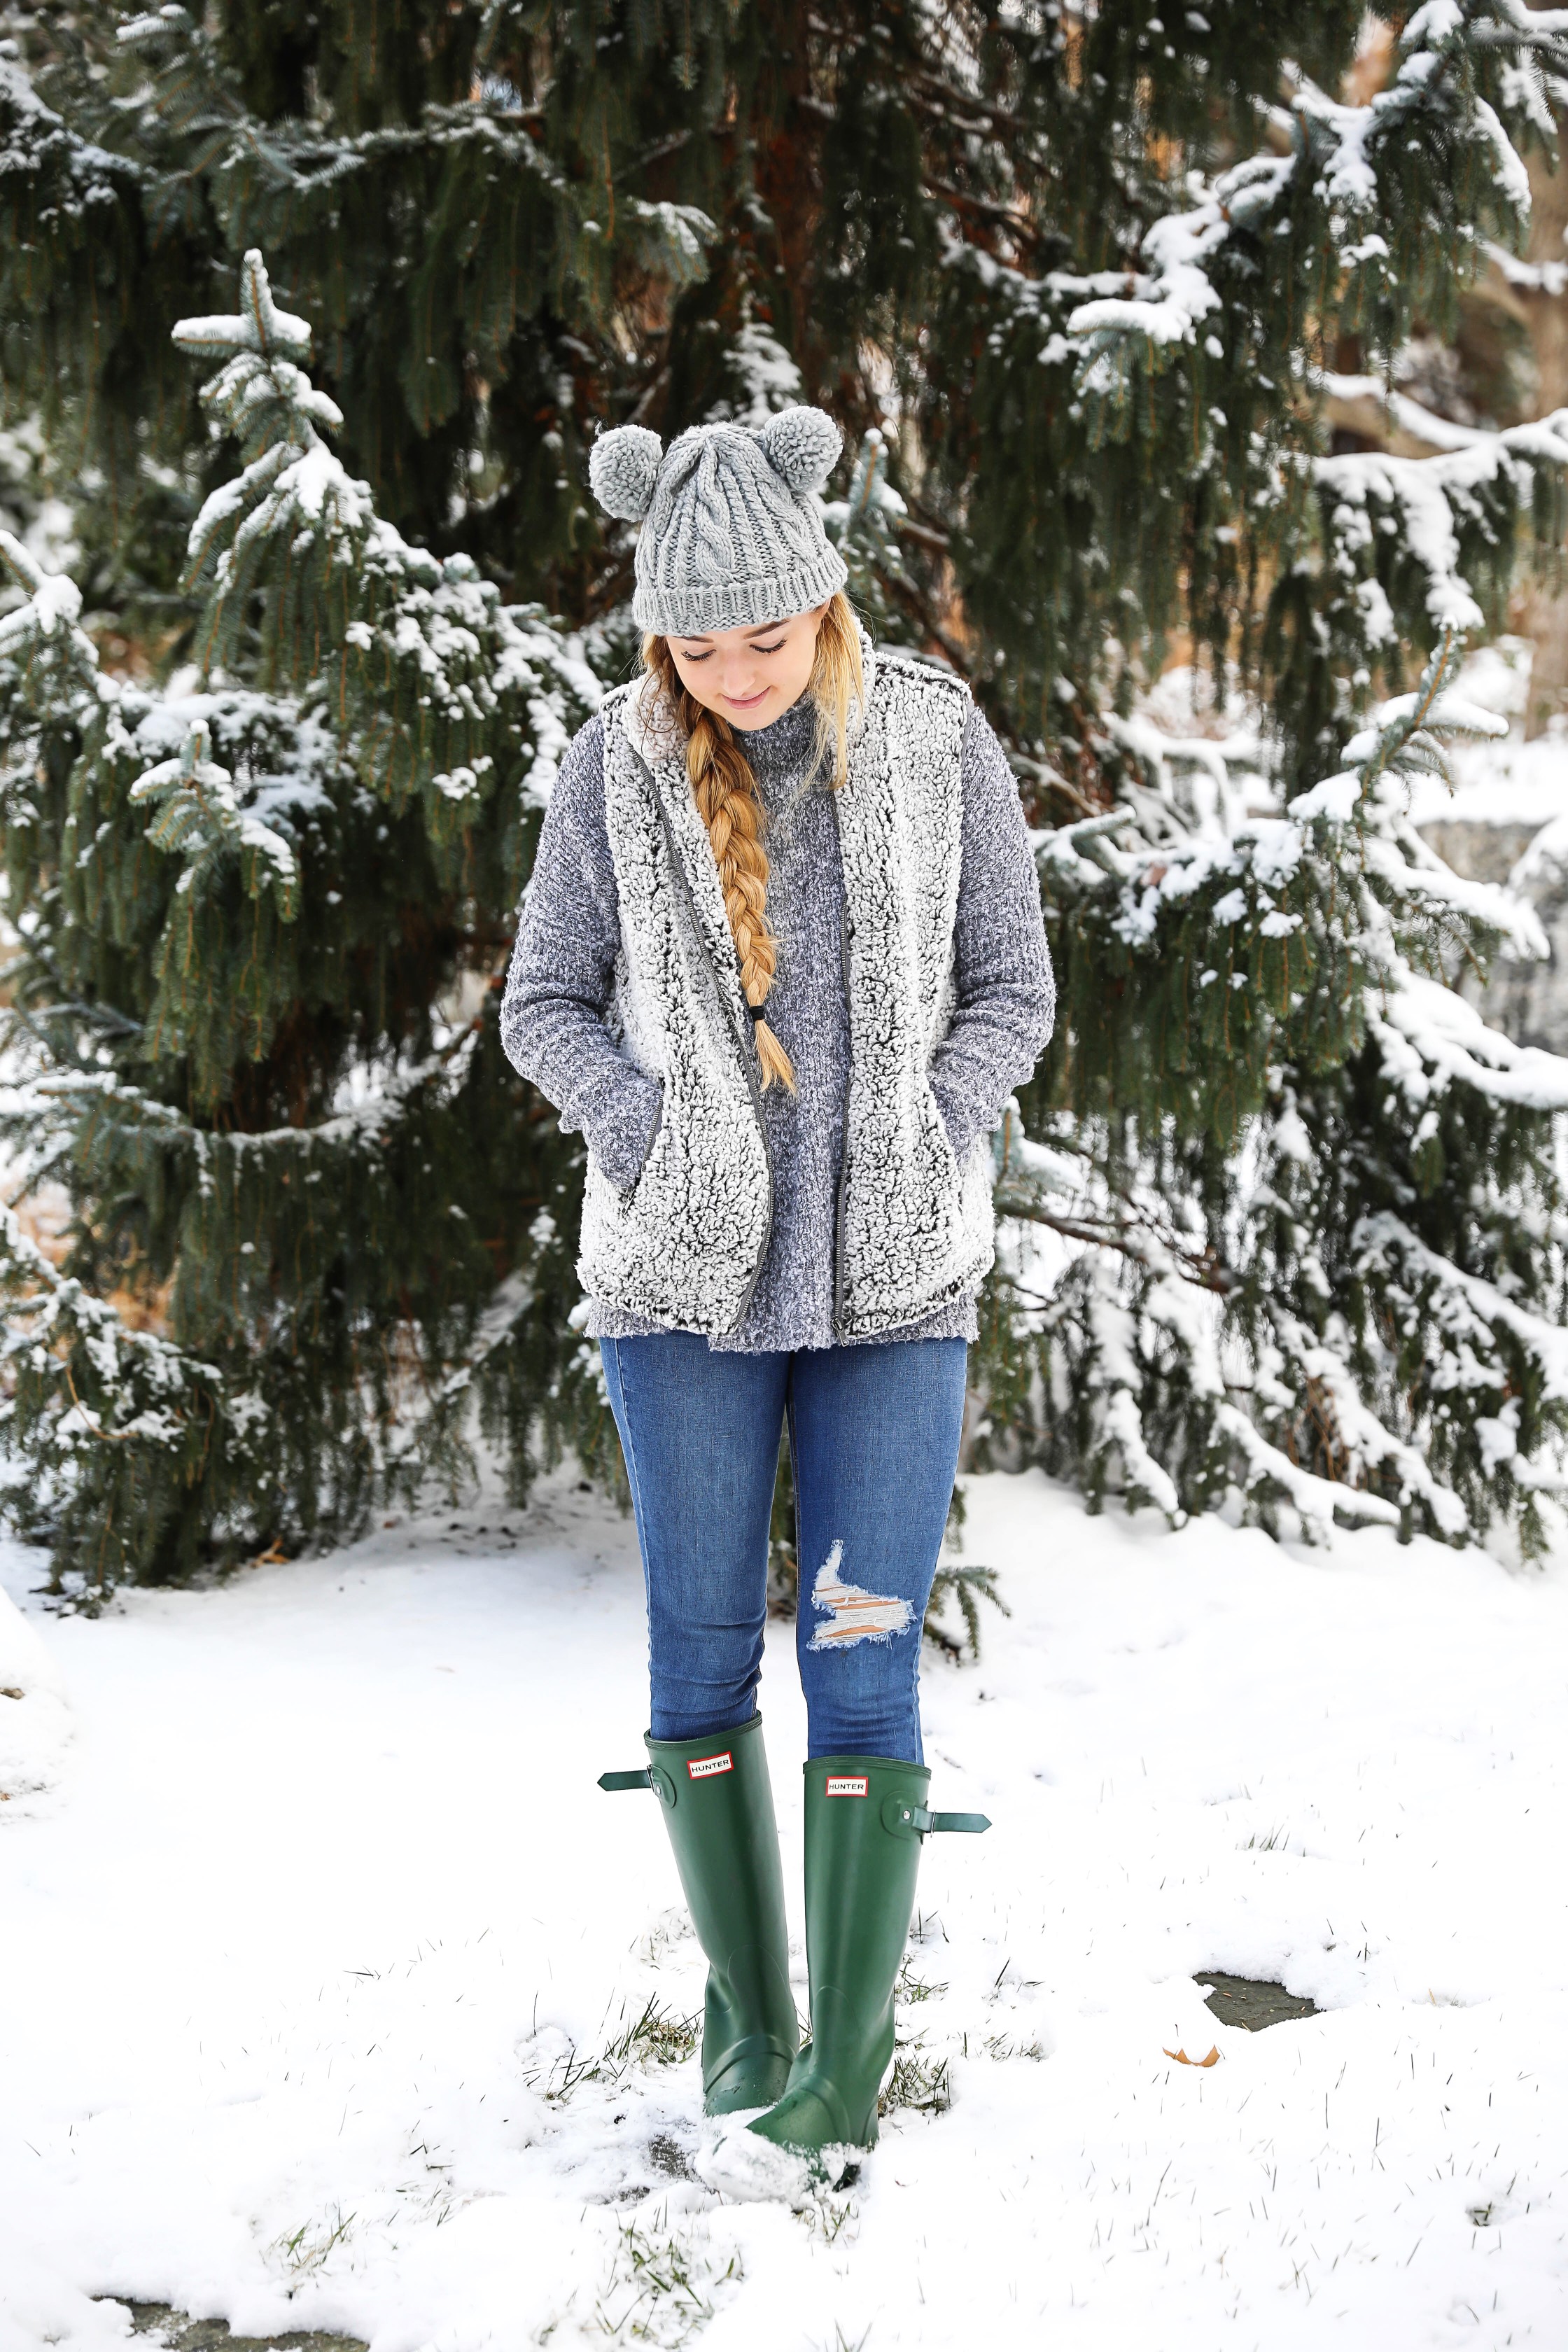 This sherpa vest is the coziest thing I own! I paired it with this soft grey sweater that has a cute turtleneck. I am also wearing my grey pom pom beanie! It has two pom poms which is super cute! I love this winter outfit! Details on fashion blog daily dose of charm by lauren lindmark